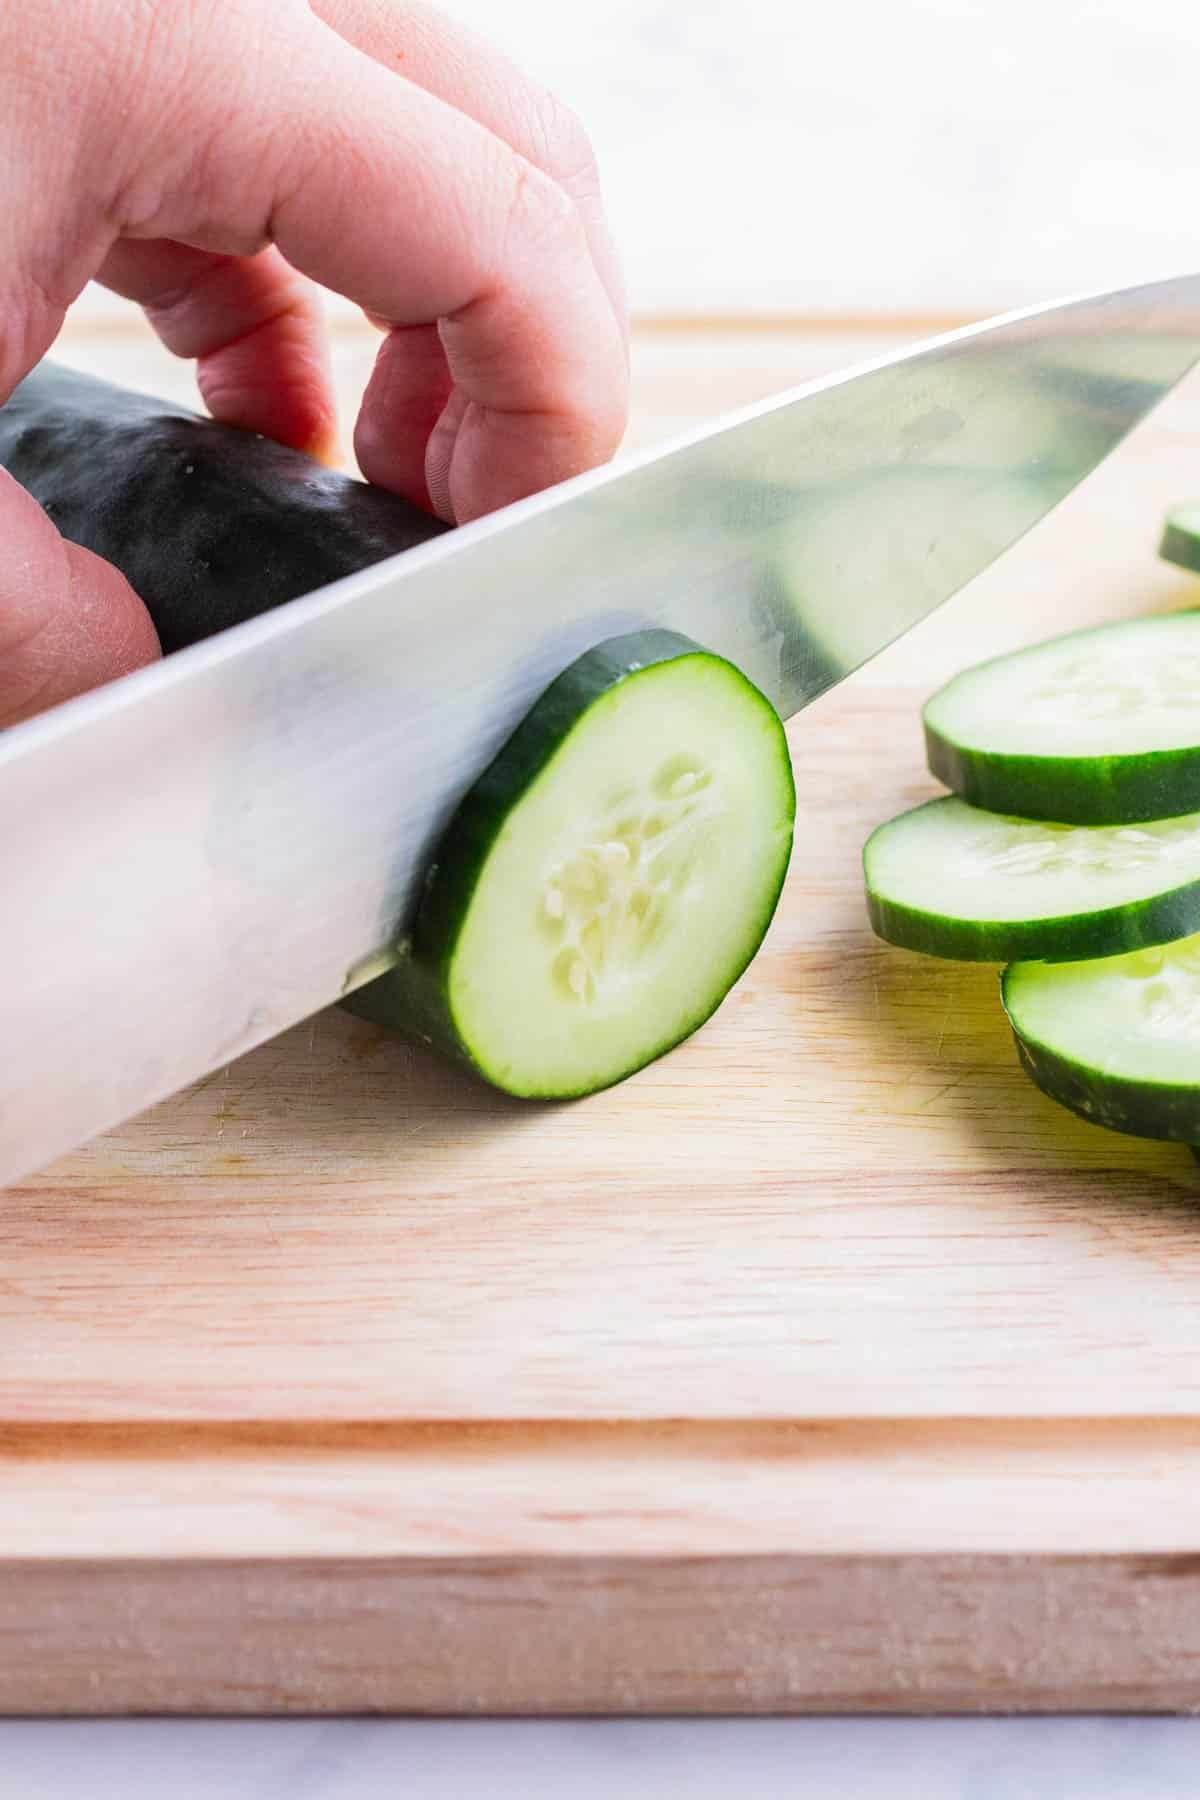 A cucumber is cut into thin slices.